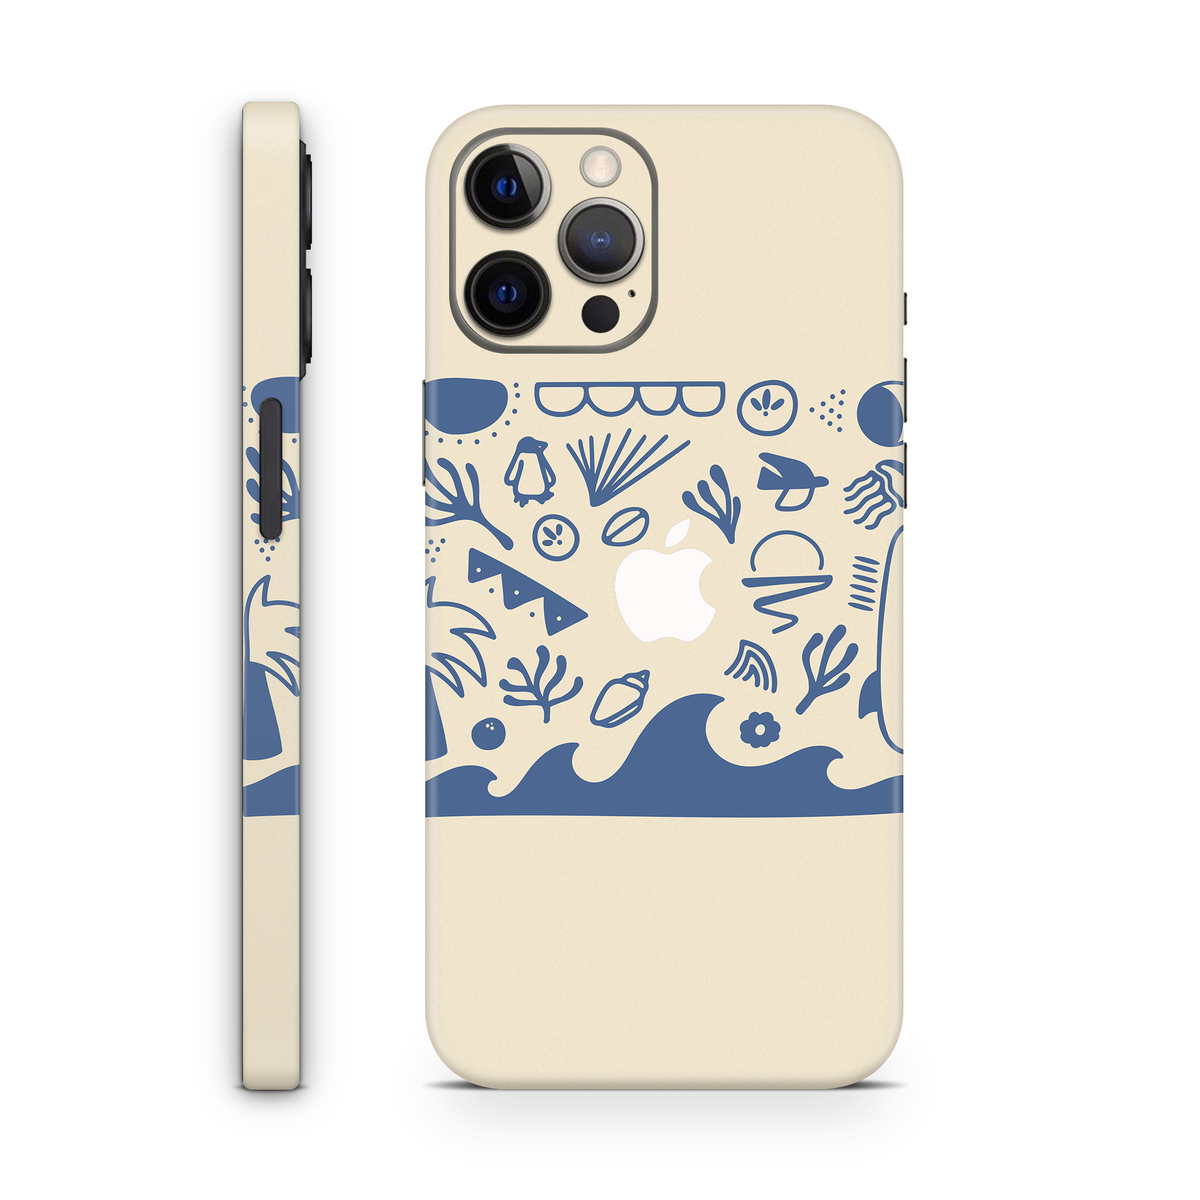 Surfs Up (iPhone Skin)